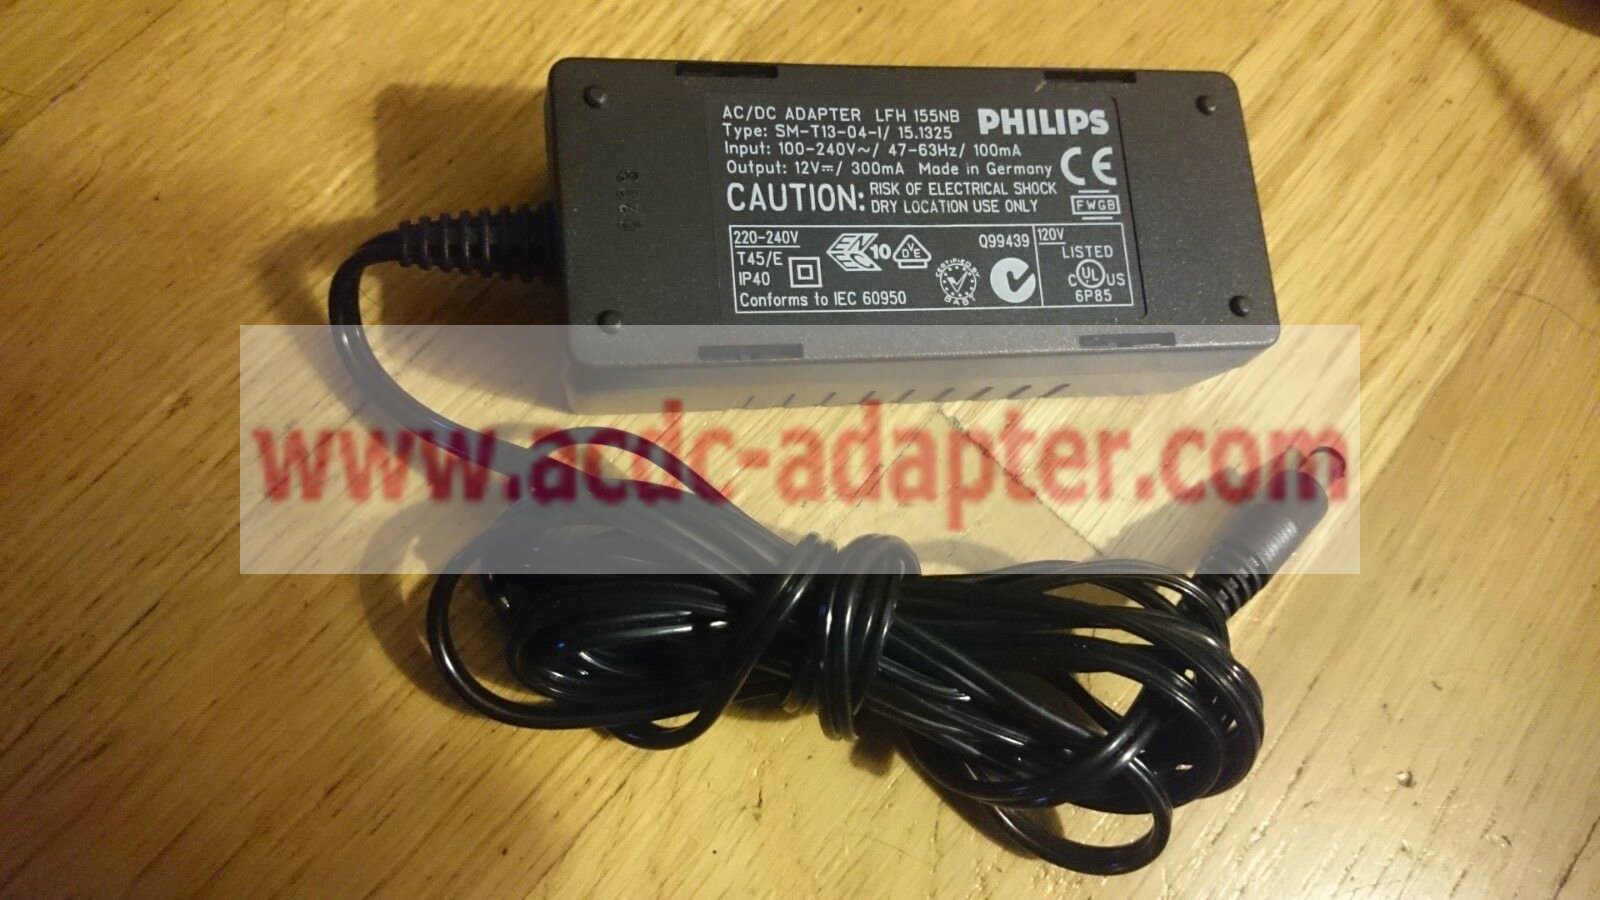 New PHILIPS LFH 155NB AC ADAPTER 12V 0.3A SM-T13-04-I / 15.1325 power supply - Click Image to Close